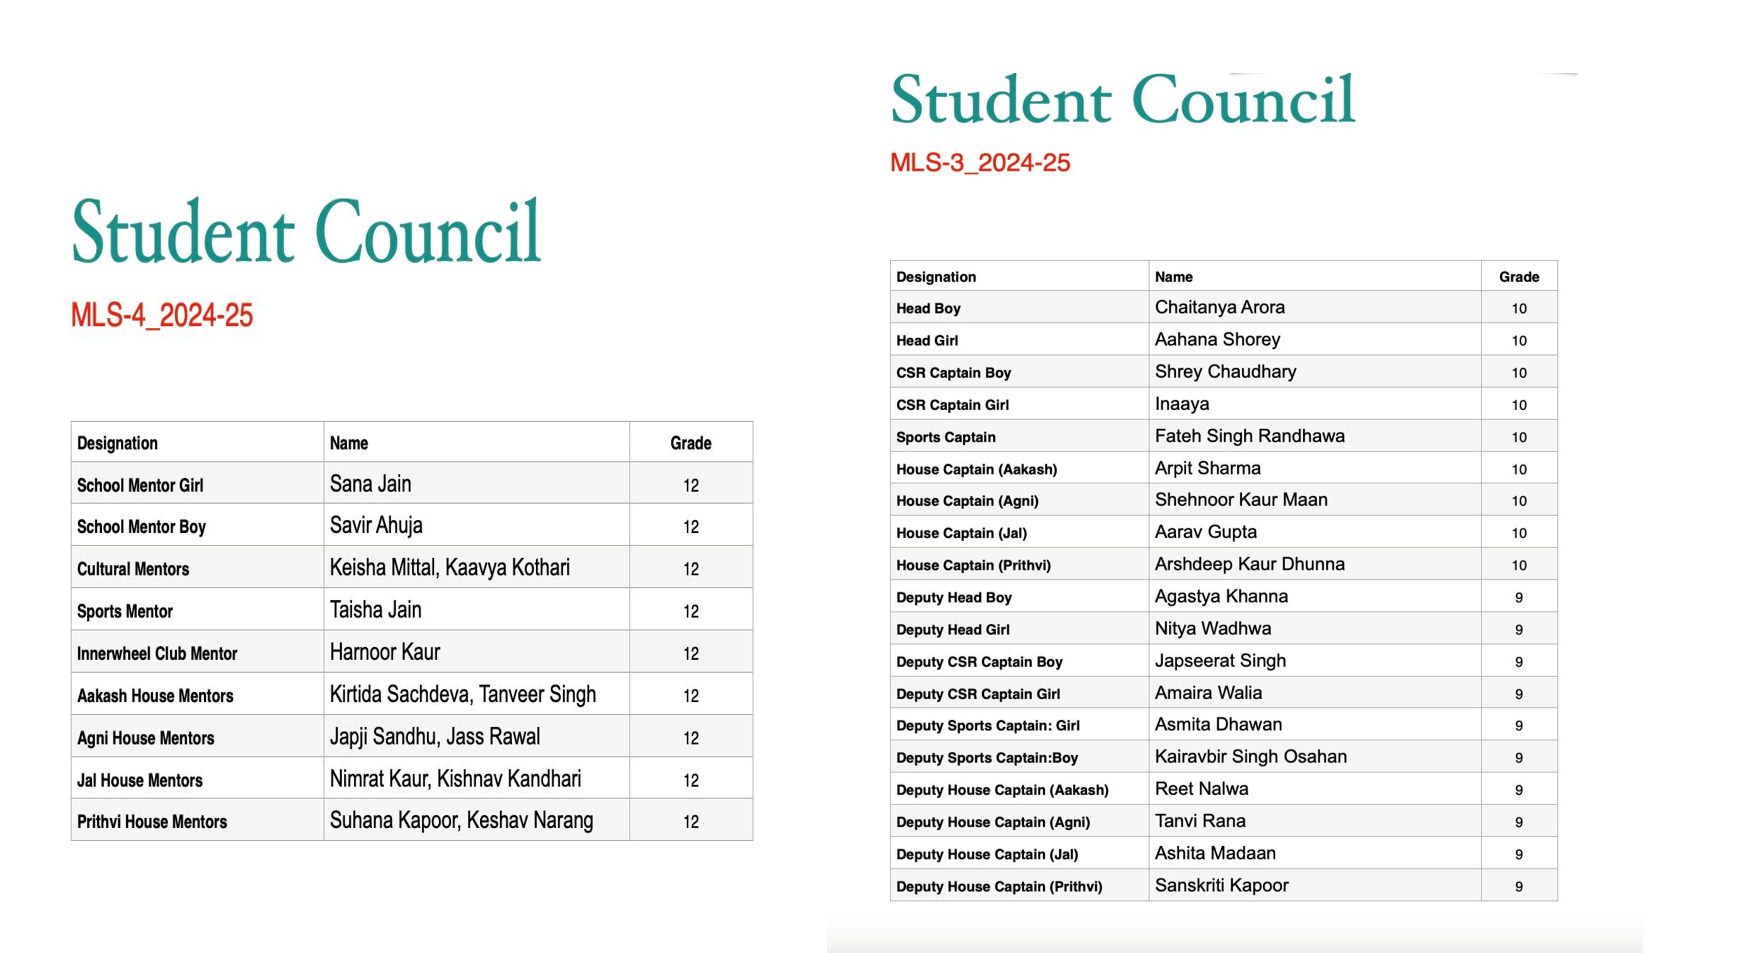 Student Council Results( MLS3 and 4)